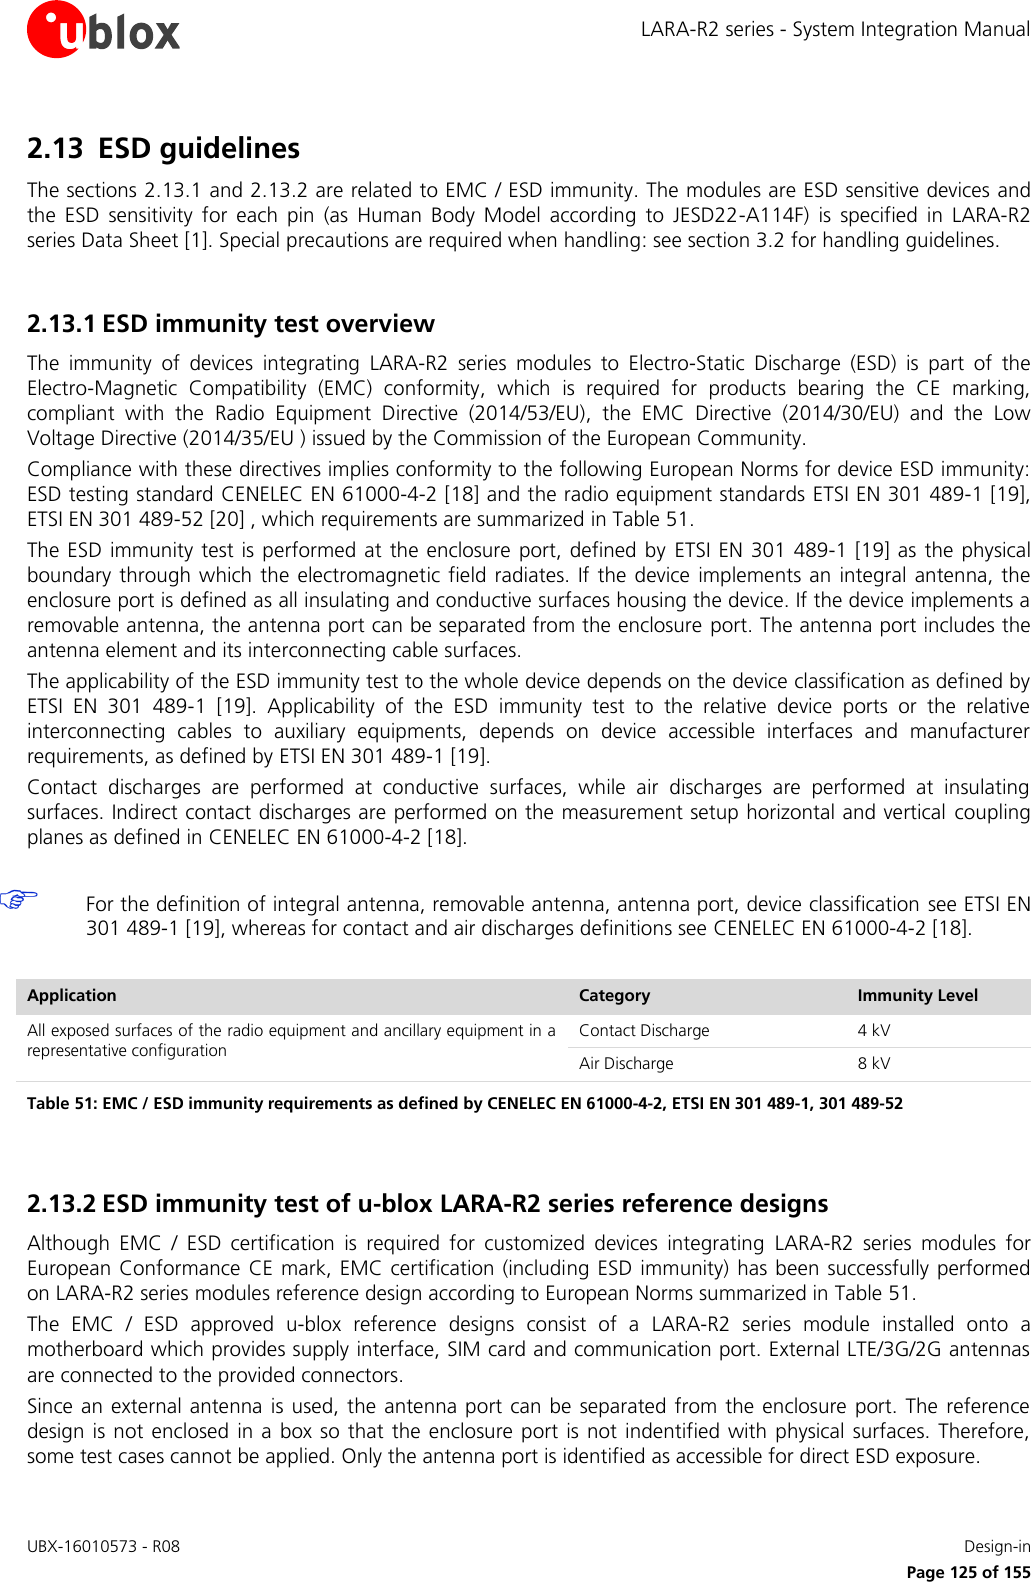 LARA-R2 series - System Integration Manual UBX-16010573 - R08    Design-in     Page 125 of 155 2.13 ESD guidelines The sections 2.13.1 and 2.13.2 are related to EMC / ESD immunity. The modules are ESD sensitive devices and the  ESD  sensitivity  for  each  pin  (as  Human  Body  Model  according  to  JESD22-A114F)  is  specified  in  LARA-R2 series Data Sheet [1]. Special precautions are required when handling: see section 3.2 for handling guidelines.  2.13.1 ESD immunity test overview The  immunity  of  devices  integrating  LARA-R2  series  modules  to  Electro-Static  Discharge  (ESD)  is  part  of  the Electro-Magnetic  Compatibility  (EMC)  conformity,  which  is  required  for  products  bearing  the  CE  marking, compliant  with  the  Radio  Equipment  Directive  (2014/53/EU),  the  EMC  Directive  (2014/30/EU)  and  the  Low Voltage Directive (2014/35/EU ) issued by the Commission of the European Community. Compliance with these directives implies conformity to the following European Norms for device ESD immunity: ESD testing standard CENELEC EN 61000-4-2 [18] and the radio equipment standards ETSI EN 301 489-1 [19], ETSI EN 301 489-52 [20] , which requirements are summarized in Table 51. The ESD immunity test  is performed at  the  enclosure  port, defined  by  ETSI EN  301  489-1 [19] as the physical boundary through which  the  electromagnetic field radiates.  If the device  implements an integral antenna, the enclosure port is defined as all insulating and conductive surfaces housing the device. If the device implements a removable antenna, the antenna port can be separated from the enclosure port. The antenna port includes the antenna element and its interconnecting cable surfaces. The applicability of the ESD immunity test to the whole device depends on the device classification as defined by ETSI  EN  301  489-1  [19].  Applicability  of  the  ESD  immunity  test  to  the  relative  device  ports  or  the  relative interconnecting  cables  to  auxiliary  equipments,  depends  on  device  accessible  interfaces  and  manufacturer requirements, as defined by ETSI EN 301 489-1 [19]. Contact  discharges  are  performed  at  conductive  surfaces,  while  air  discharges  are  performed  at  insulating surfaces. Indirect contact discharges are performed on the measurement setup horizontal and vertical  coupling planes as defined in CENELEC EN 61000-4-2 [18].   For the definition of integral antenna, removable antenna, antenna port, device classification see ETSI EN 301 489-1 [19], whereas for contact and air discharges definitions see CENELEC EN 61000-4-2 [18].  Application Category Immunity Level All exposed surfaces of the radio equipment and ancillary equipment in a representative configuration Contact Discharge 4 kV Air Discharge 8 kV Table 51: EMC / ESD immunity requirements as defined by CENELEC EN 61000-4-2, ETSI EN 301 489-1, 301 489-52  2.13.2 ESD immunity test of u-blox LARA-R2 series reference designs Although  EMC  /  ESD  certification  is  required  for  customized  devices  integrating  LARA-R2  series  modules  for European Conformance  CE mark, EMC certification (including ESD immunity) has been successfully performed on LARA-R2 series modules reference design according to European Norms summarized in Table 51. The  EMC  /  ESD  approved  u-blox  reference  designs  consist  of  a  LARA-R2  series  module  installed  onto  a motherboard which provides supply interface, SIM card and communication port. External LTE/3G/2G antennas are connected to the provided connectors. Since an  external antenna  is used, the antenna port  can be  separated from  the enclosure port.  The reference design is  not  enclosed  in a  box so that  the  enclosure  port is  not indentified with physical  surfaces.  Therefore, some test cases cannot be applied. Only the antenna port is identified as accessible for direct ESD exposure. 